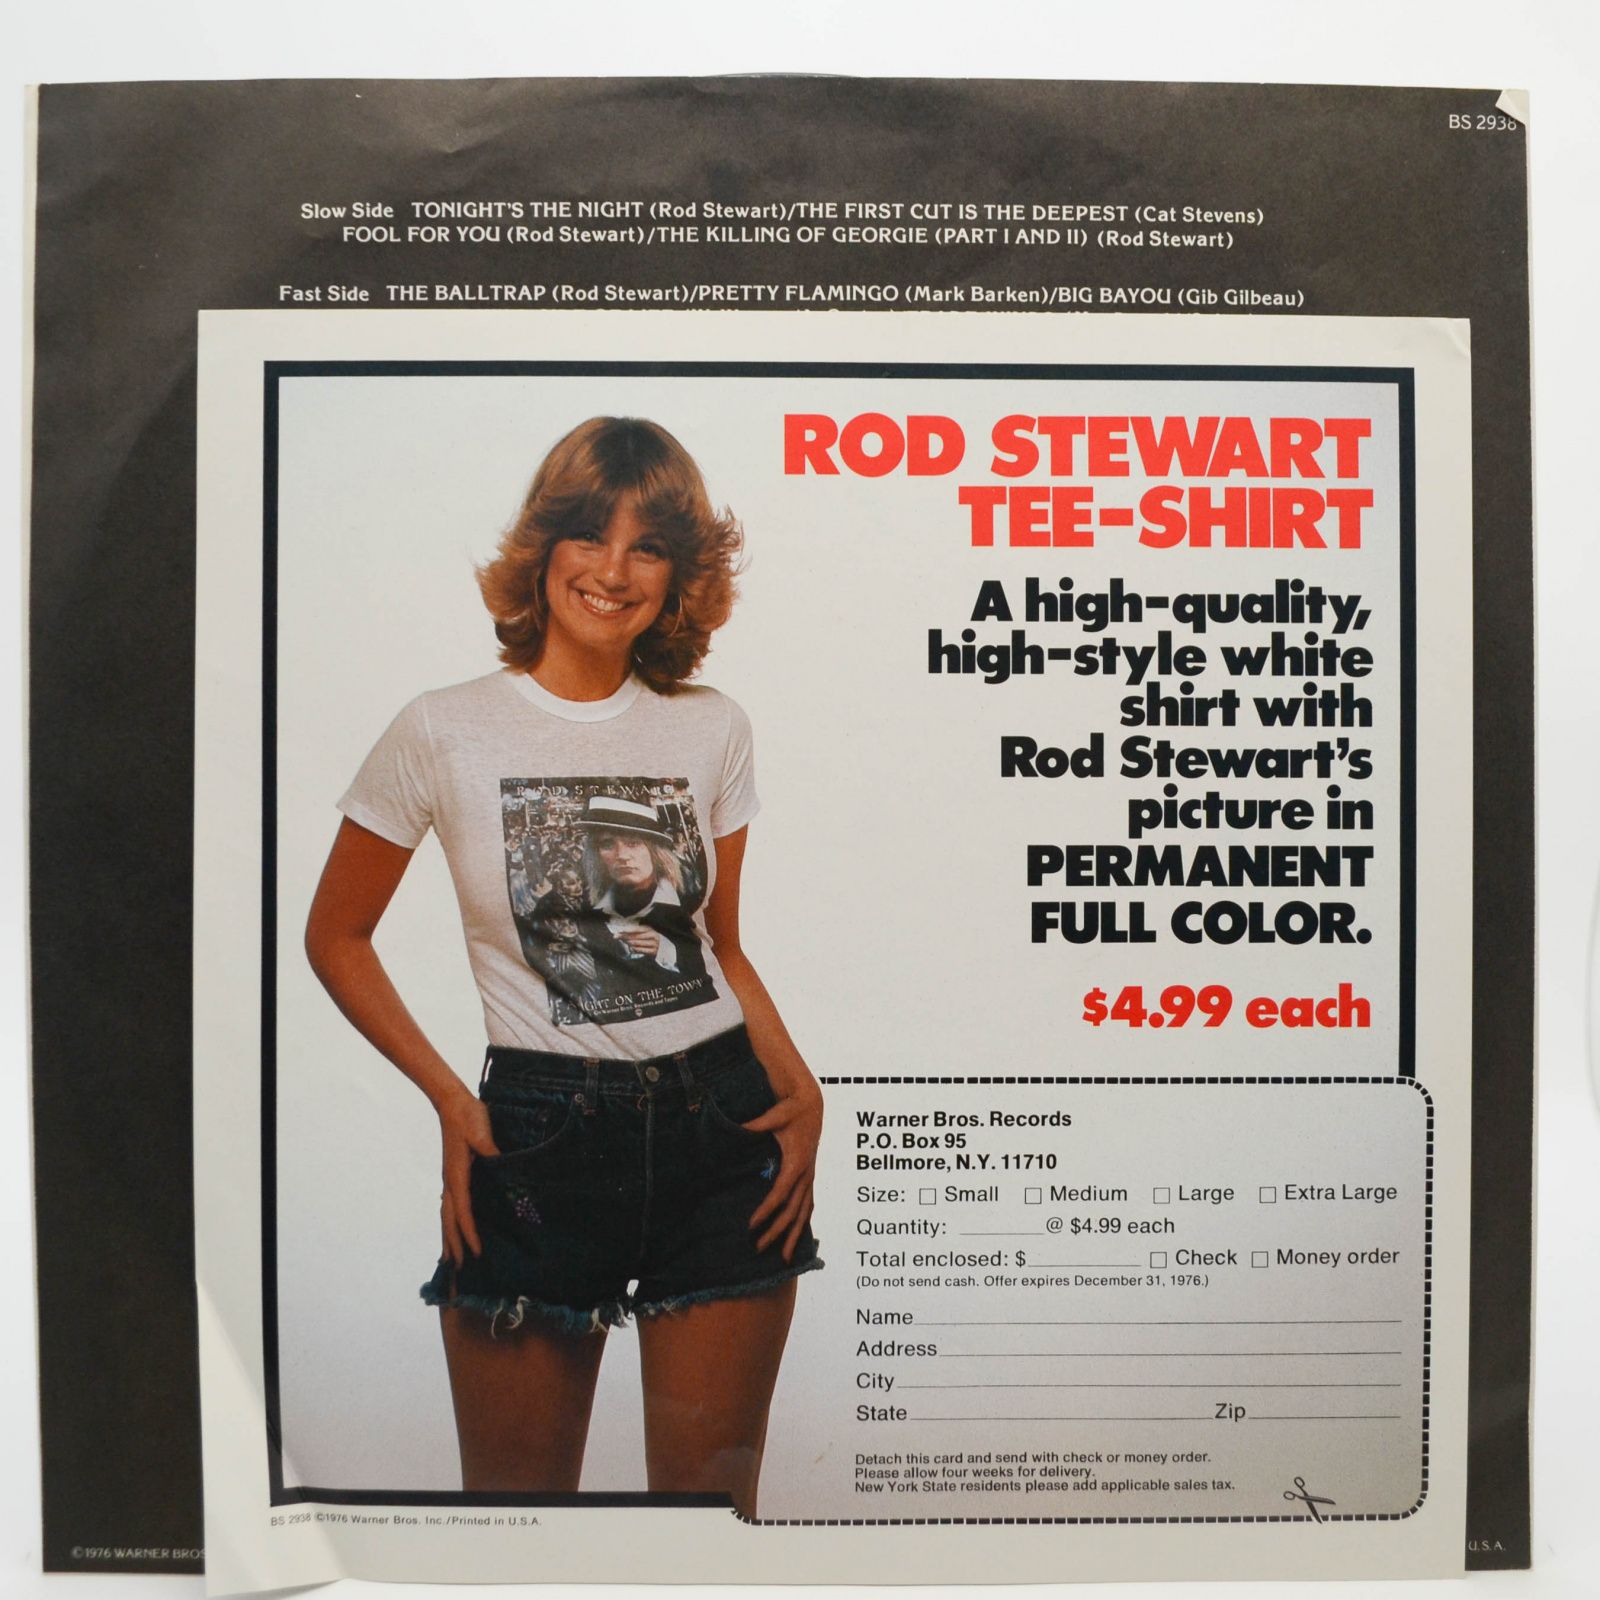 Rod Stewart — A Night On The Town (USA), 1976